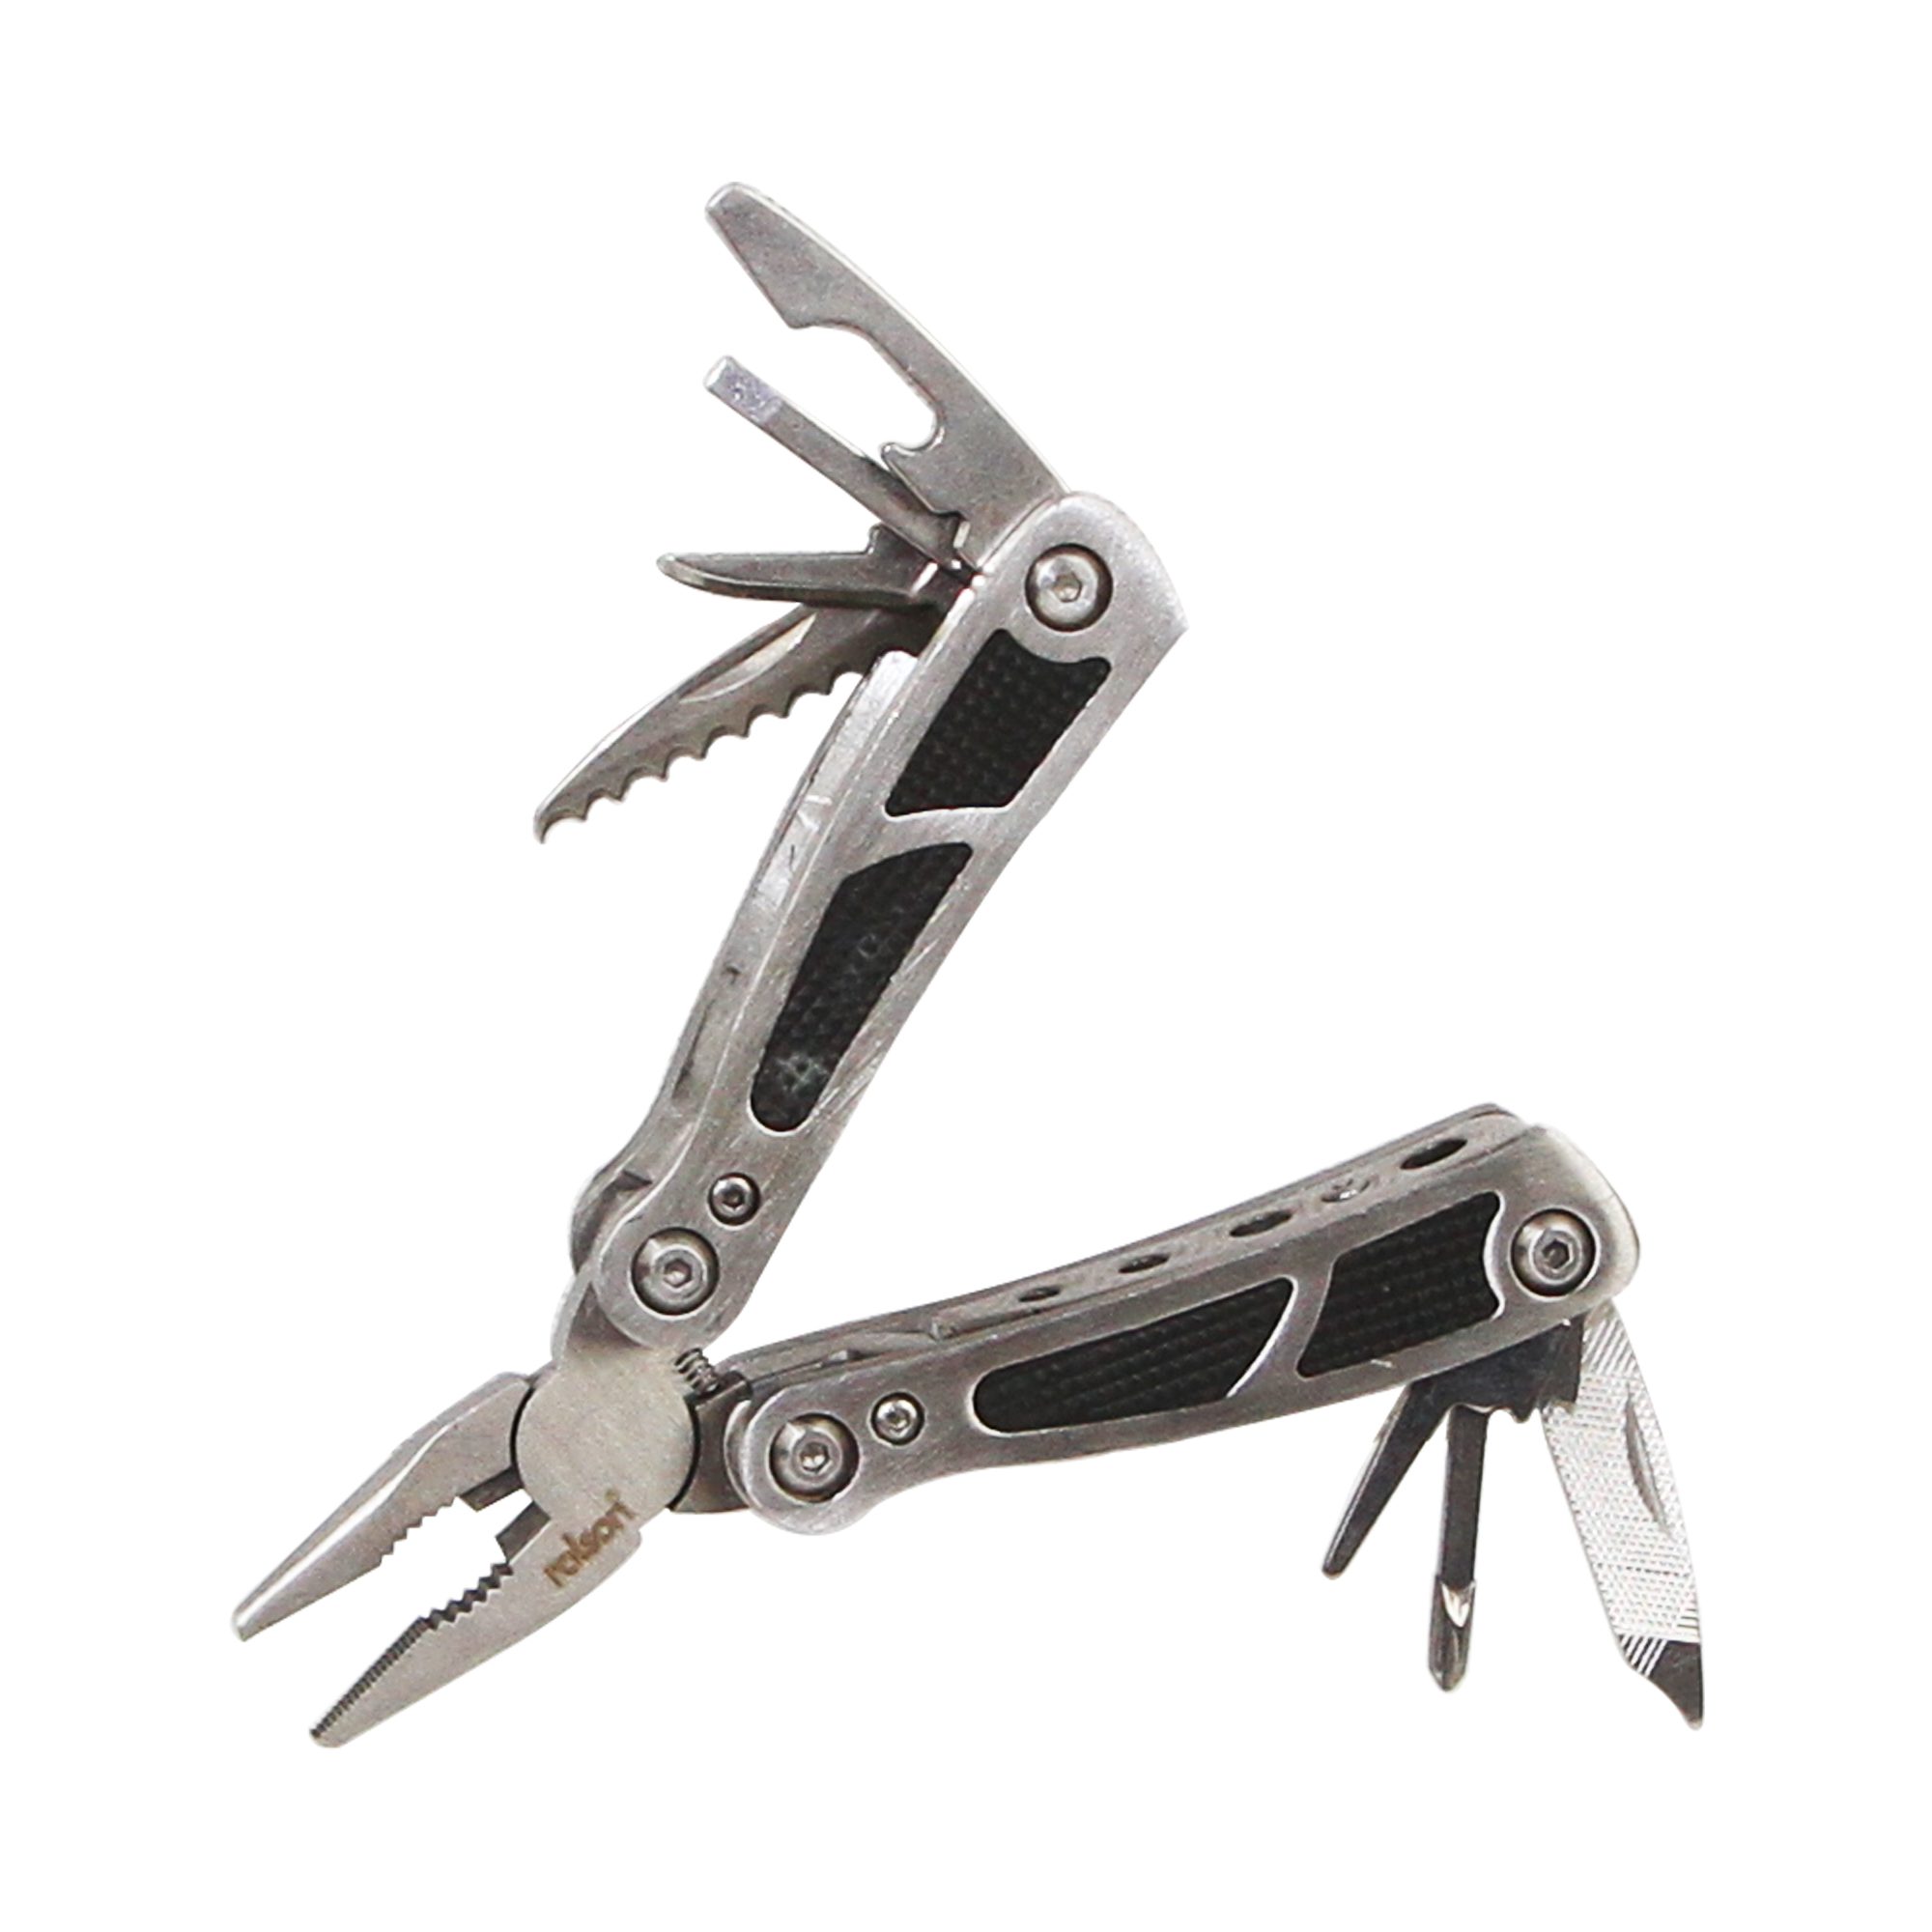 Mini Multi-Tool 36009 - 12 in 1 with pliers, screwdrivers and other  accessories only 70mm x 30mm closed